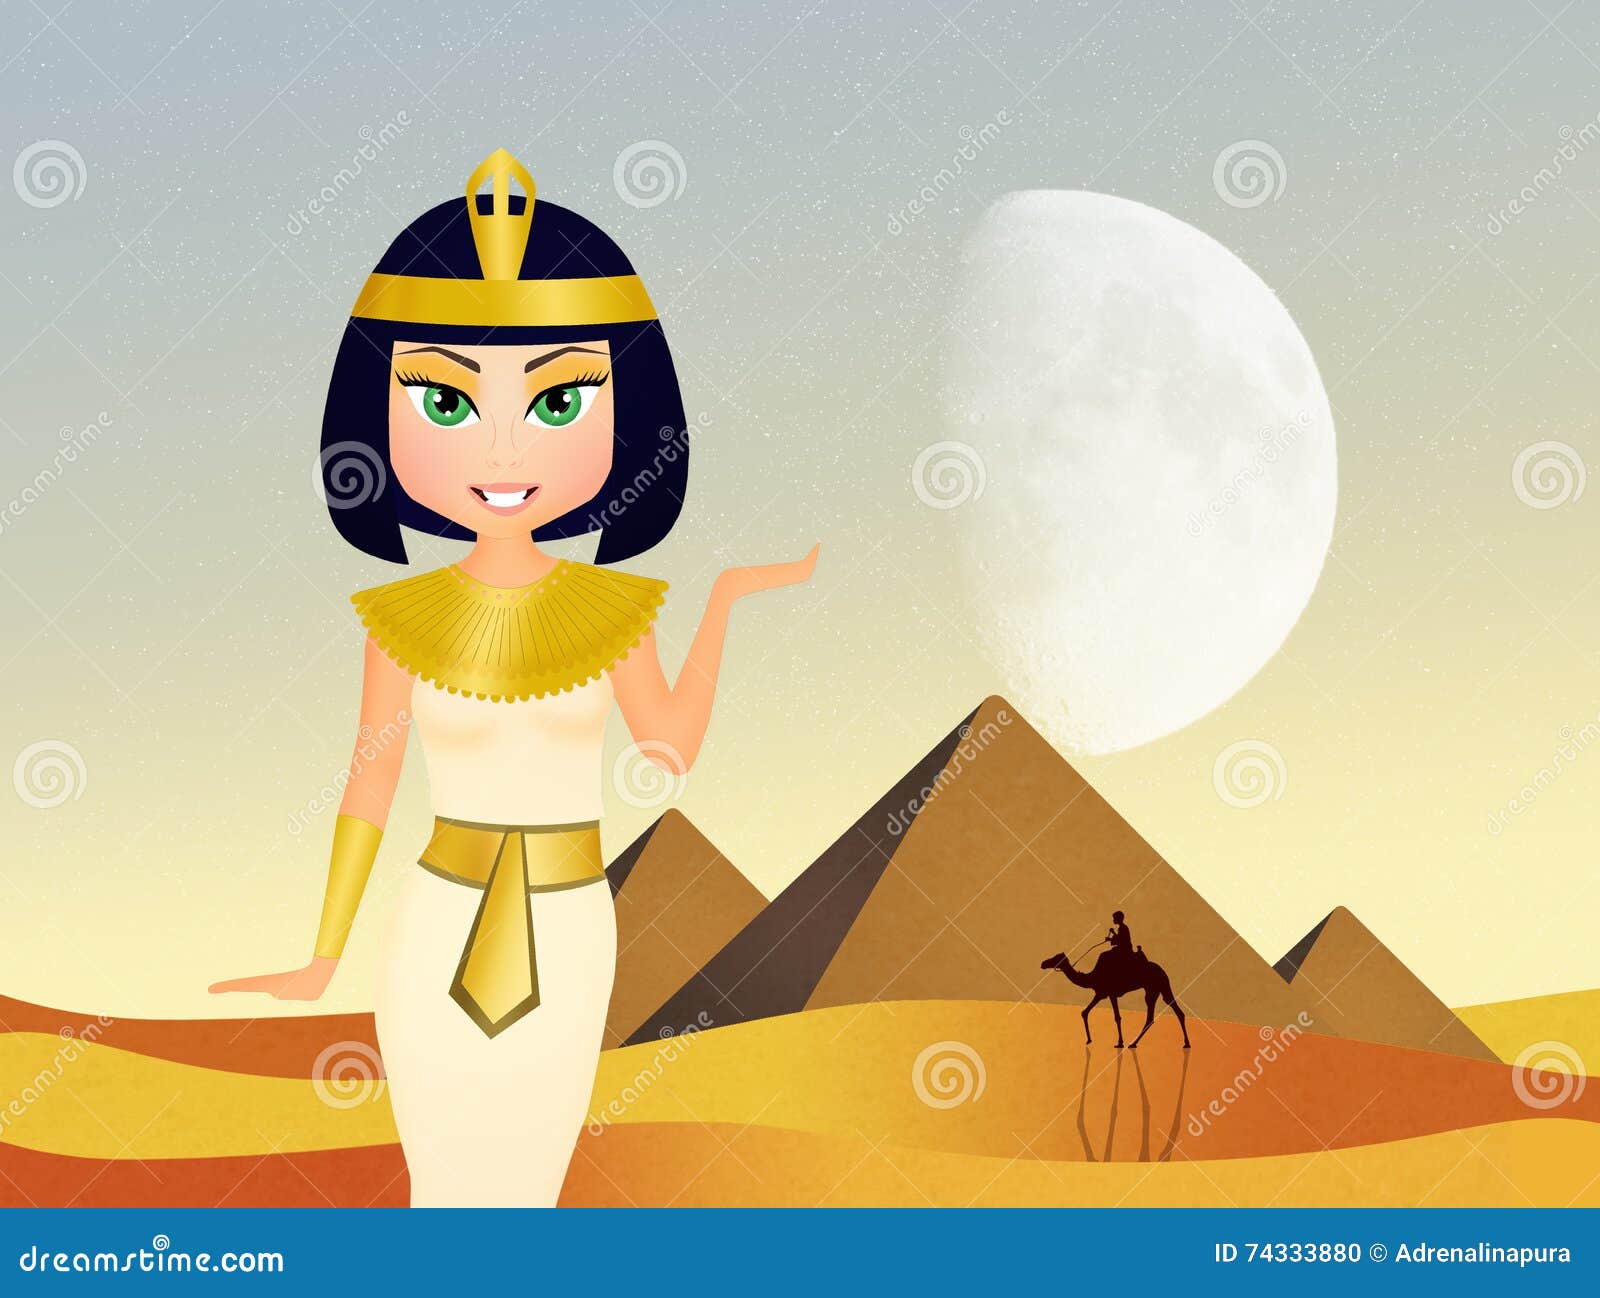 Queen Cleopatra Of Egypt Clipart 